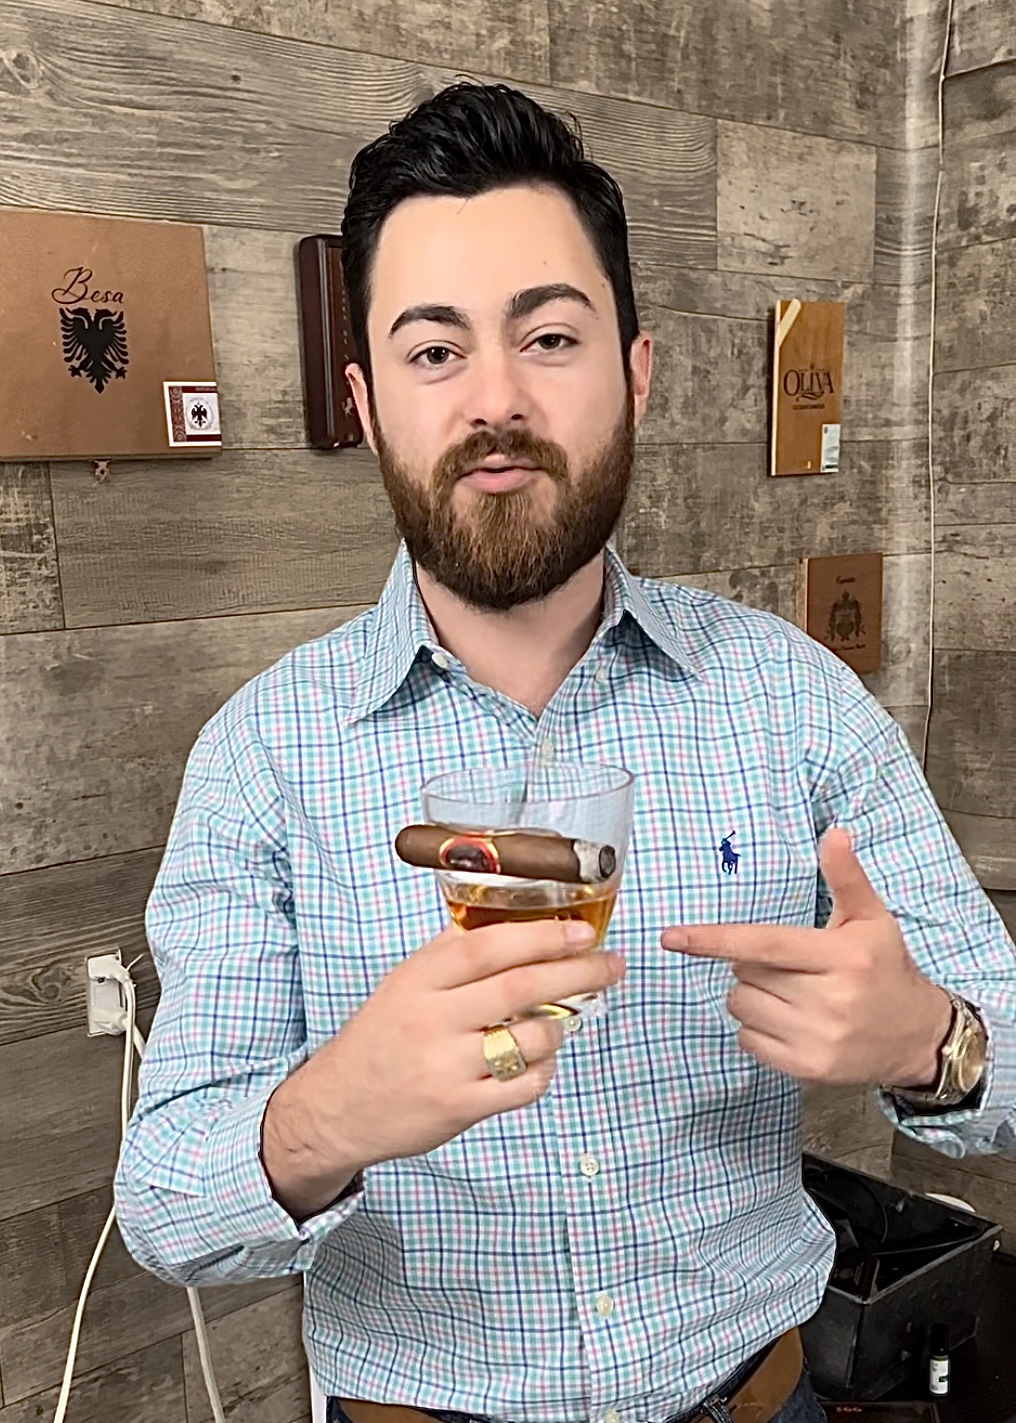 Alex with the Besa cigar and bourban